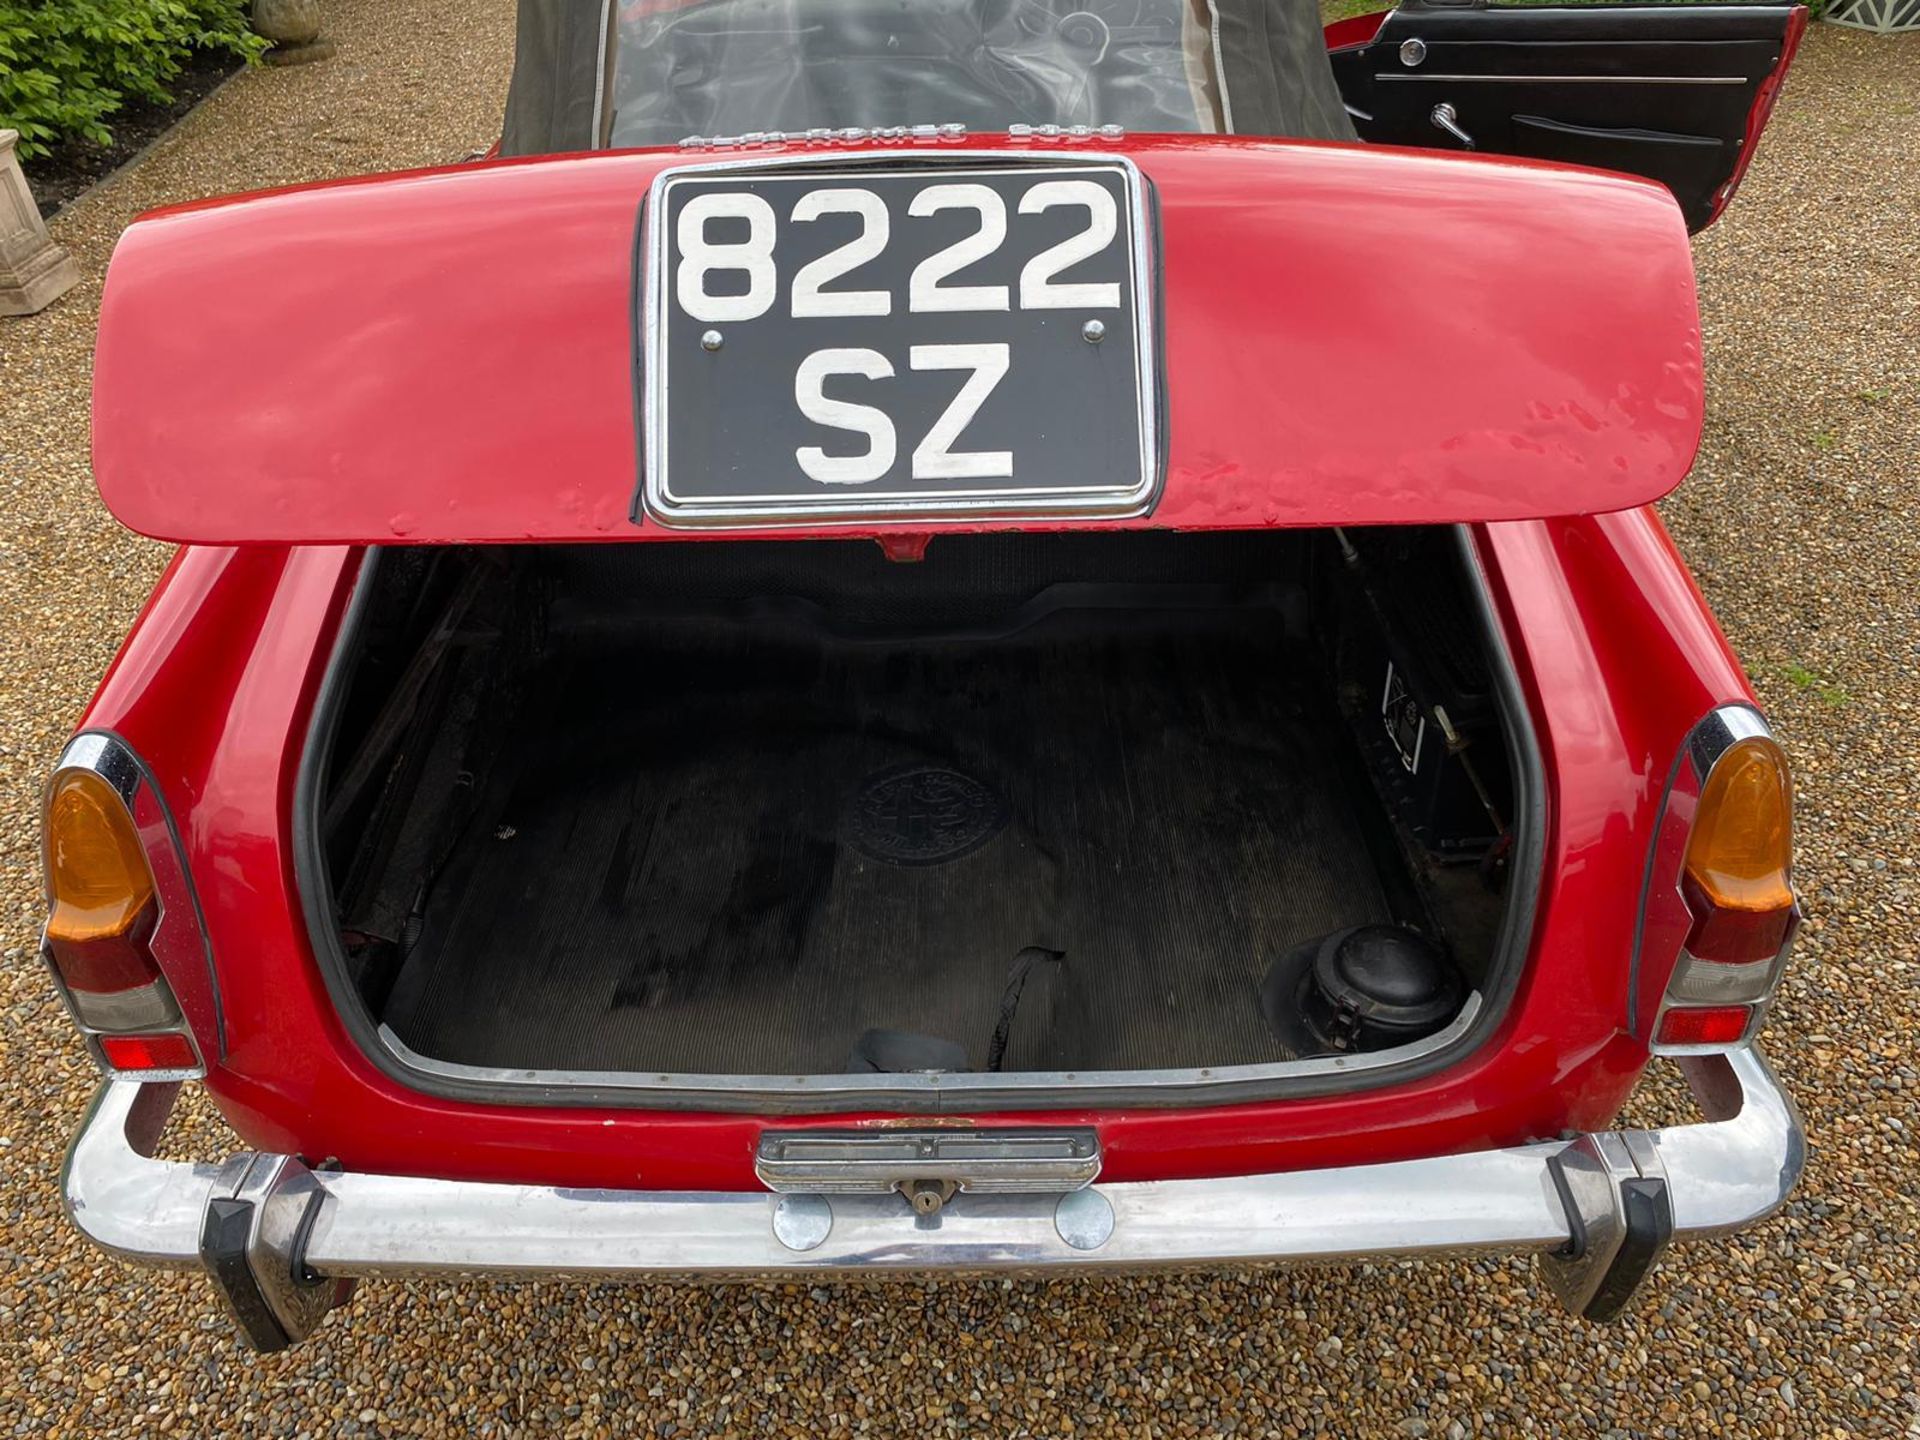 1963 Alfa Romeo 2600 Spider - First Registered 1967 - Image 21 of 25